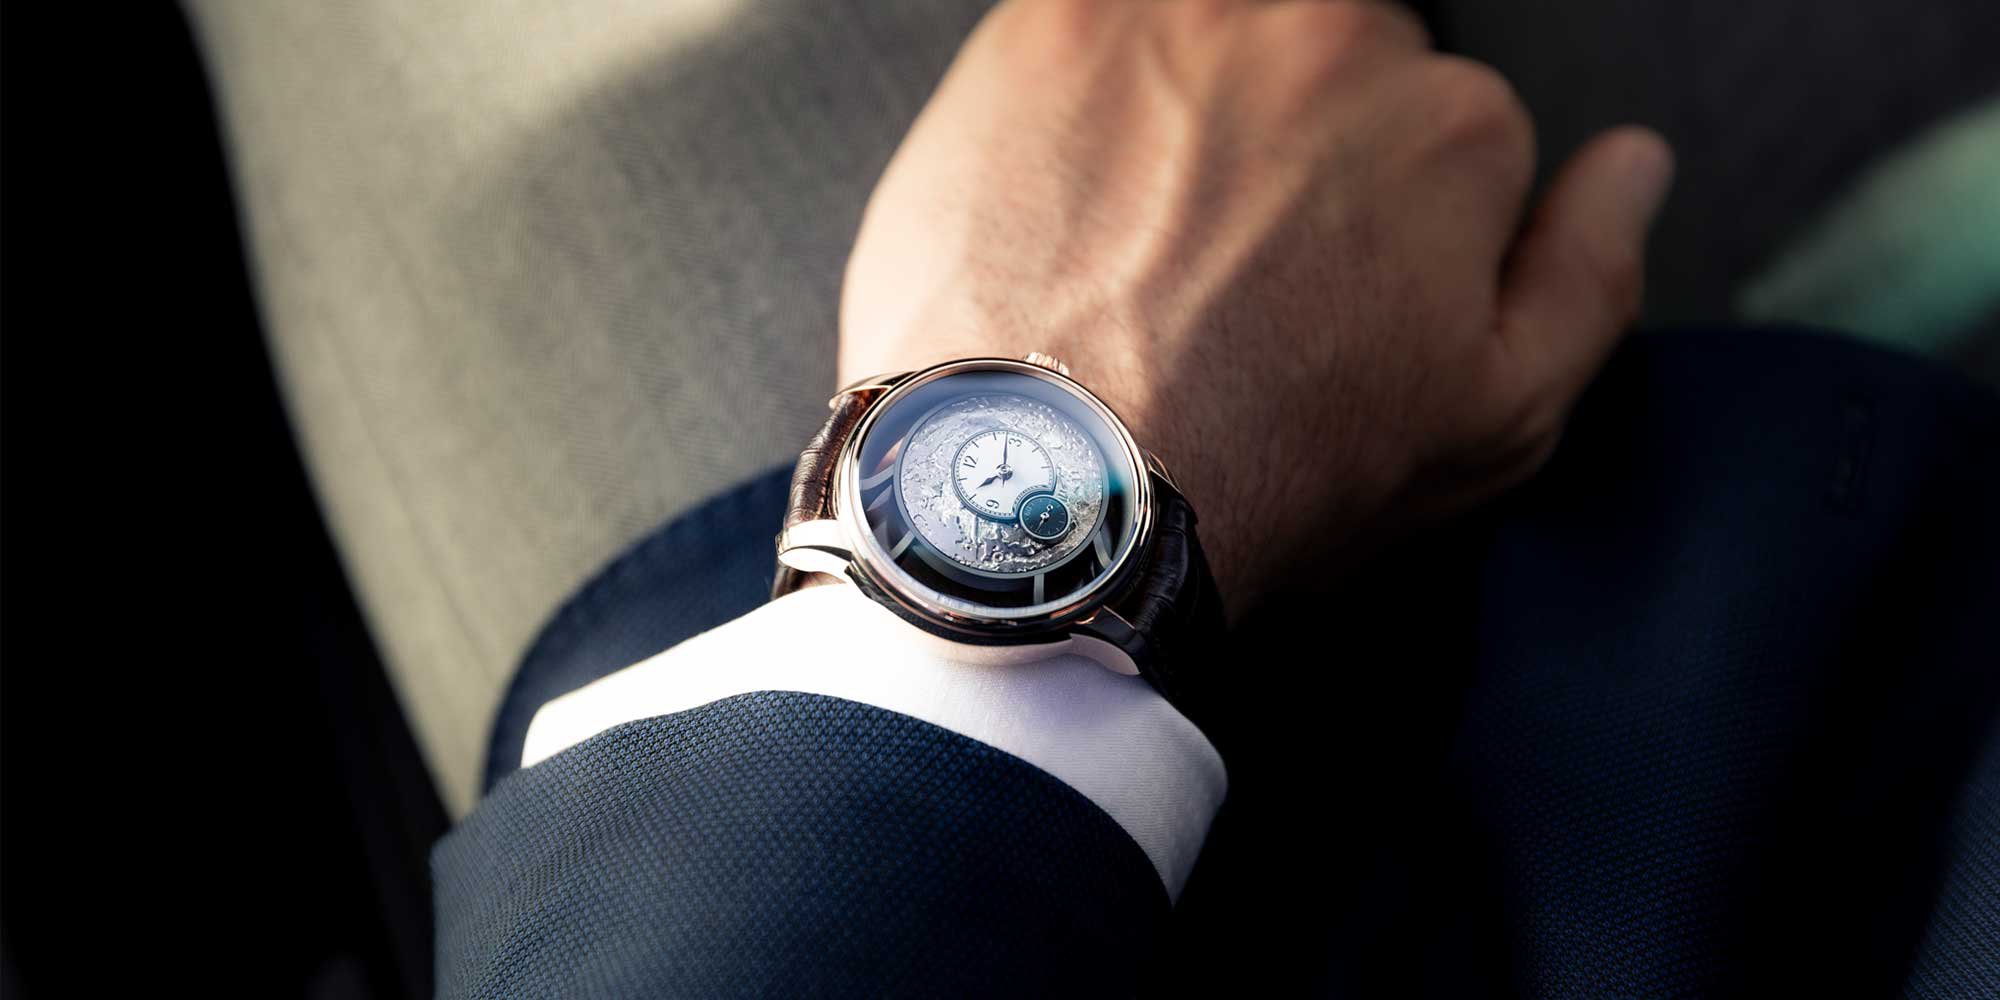 INTRODUCING: THE MORITZ GROSSMANN BENU ANNIVERSARY ‘LOST IN SPACE’